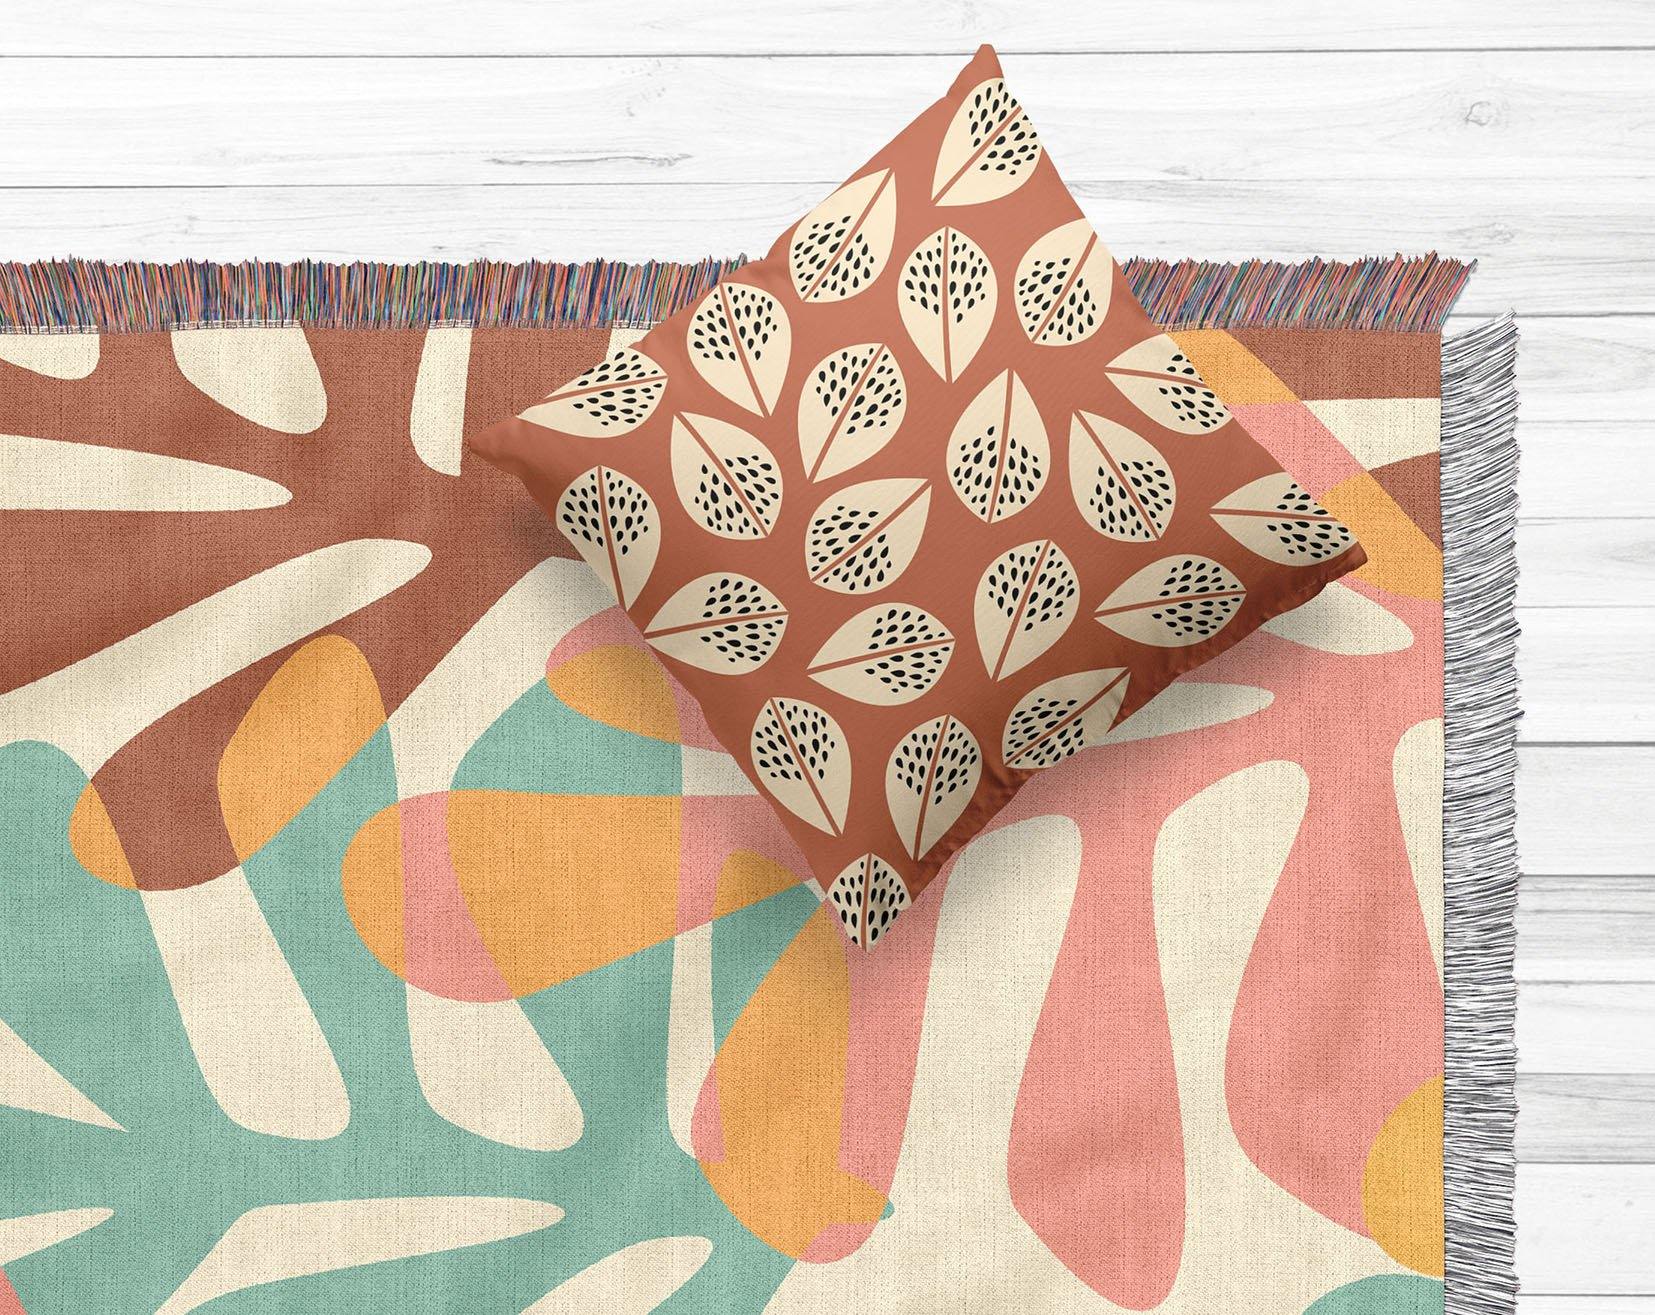 Buy online Premium Quality Abstract Leaves Pattern Cotton Woven Blanket - Urban Jungle Life